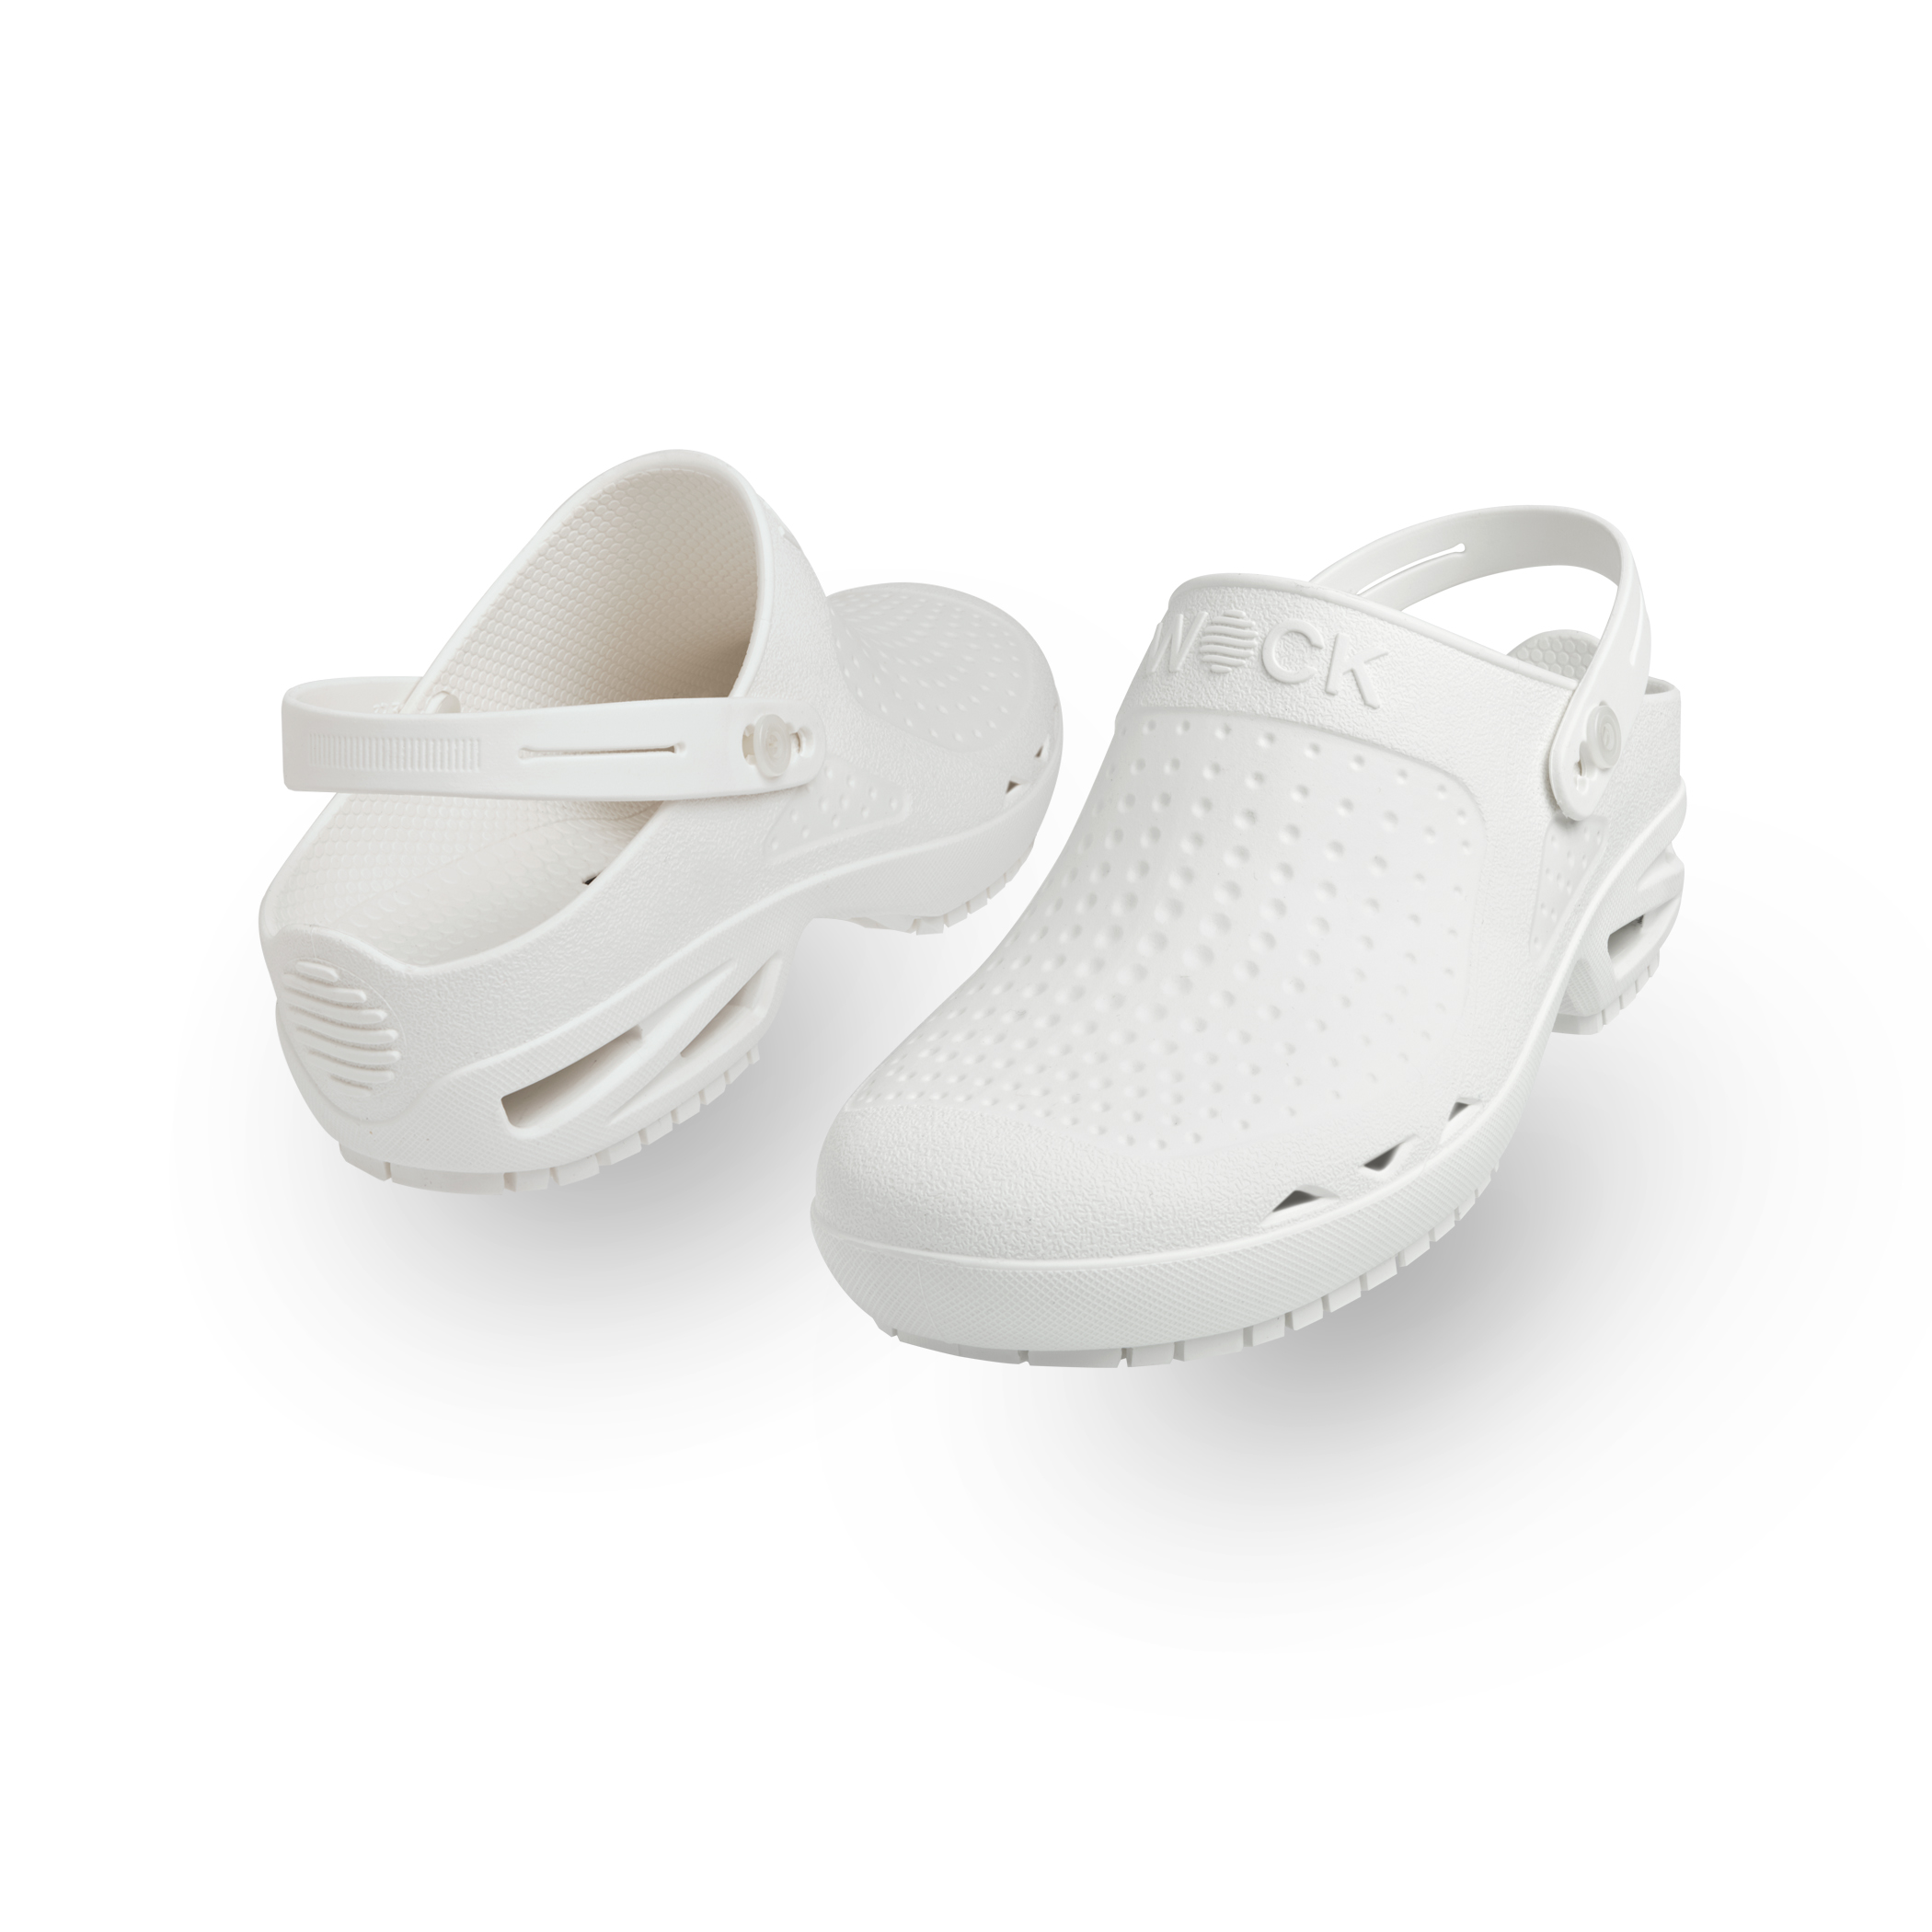 Medical Work Clogs Doctor Shoes Classic Clog Slip-On Iconic Lightweight ...